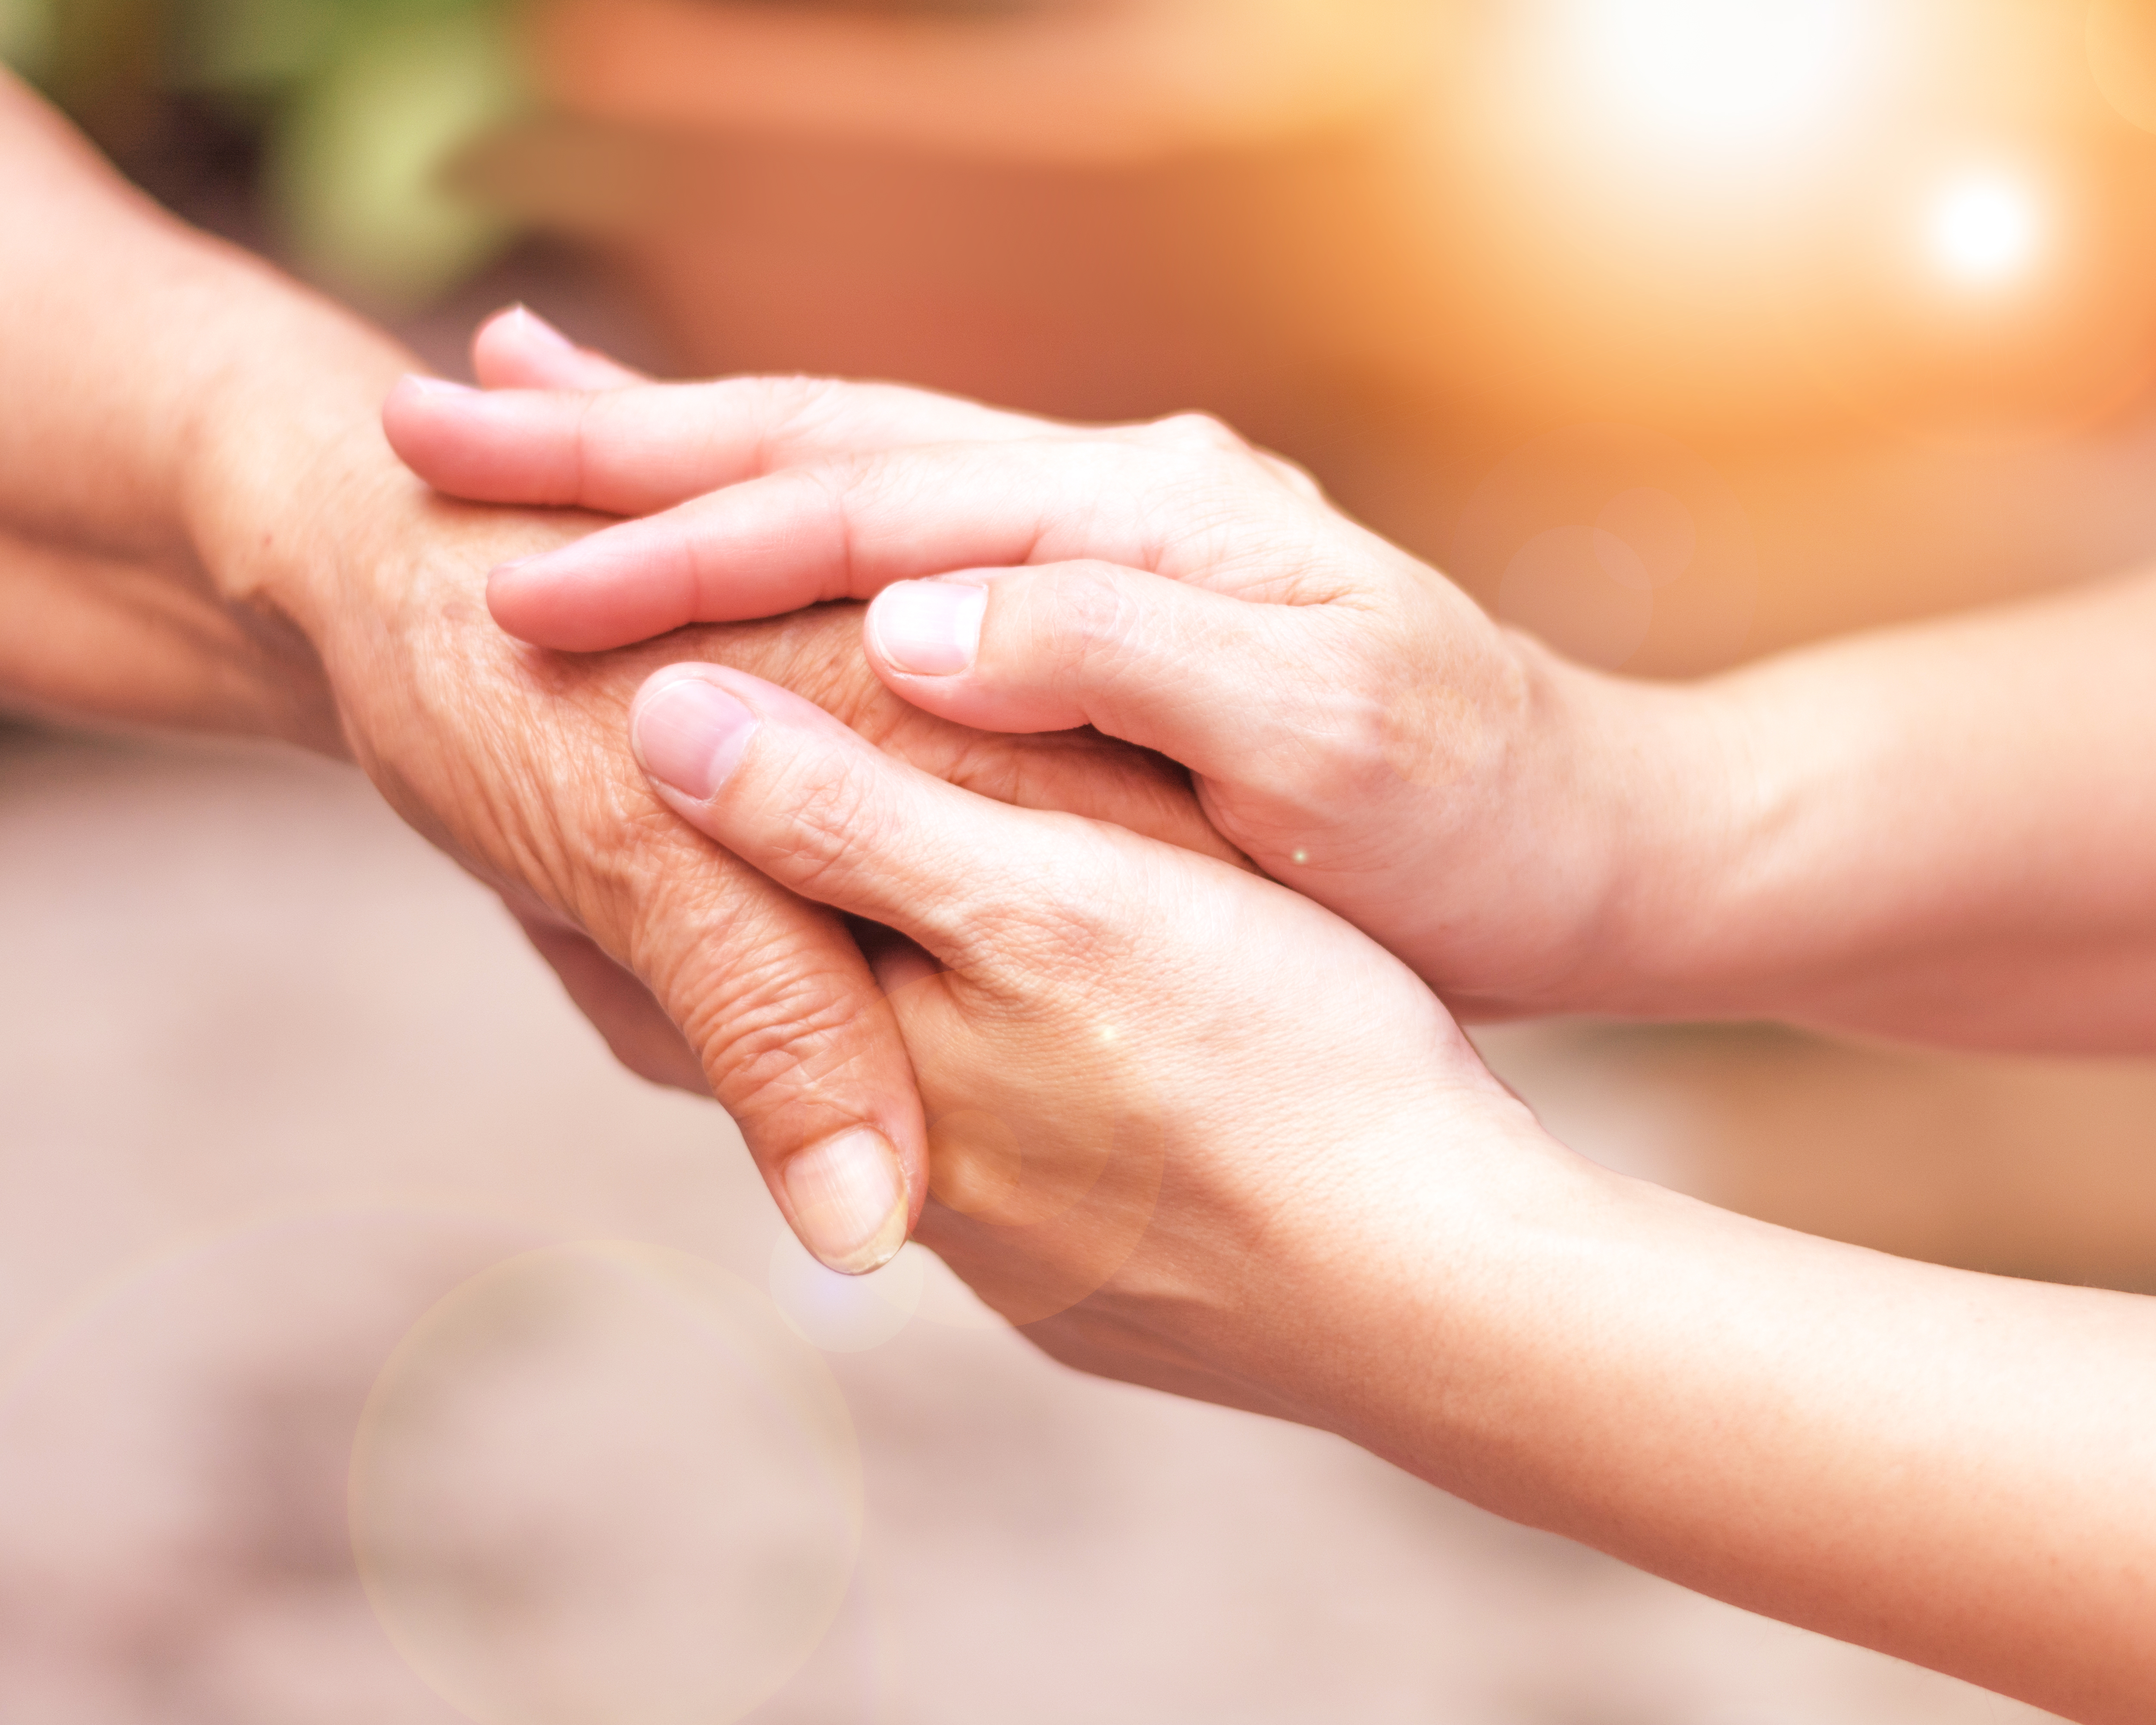 The Top 10 Tips on Caring for Caregivers During COVID-19